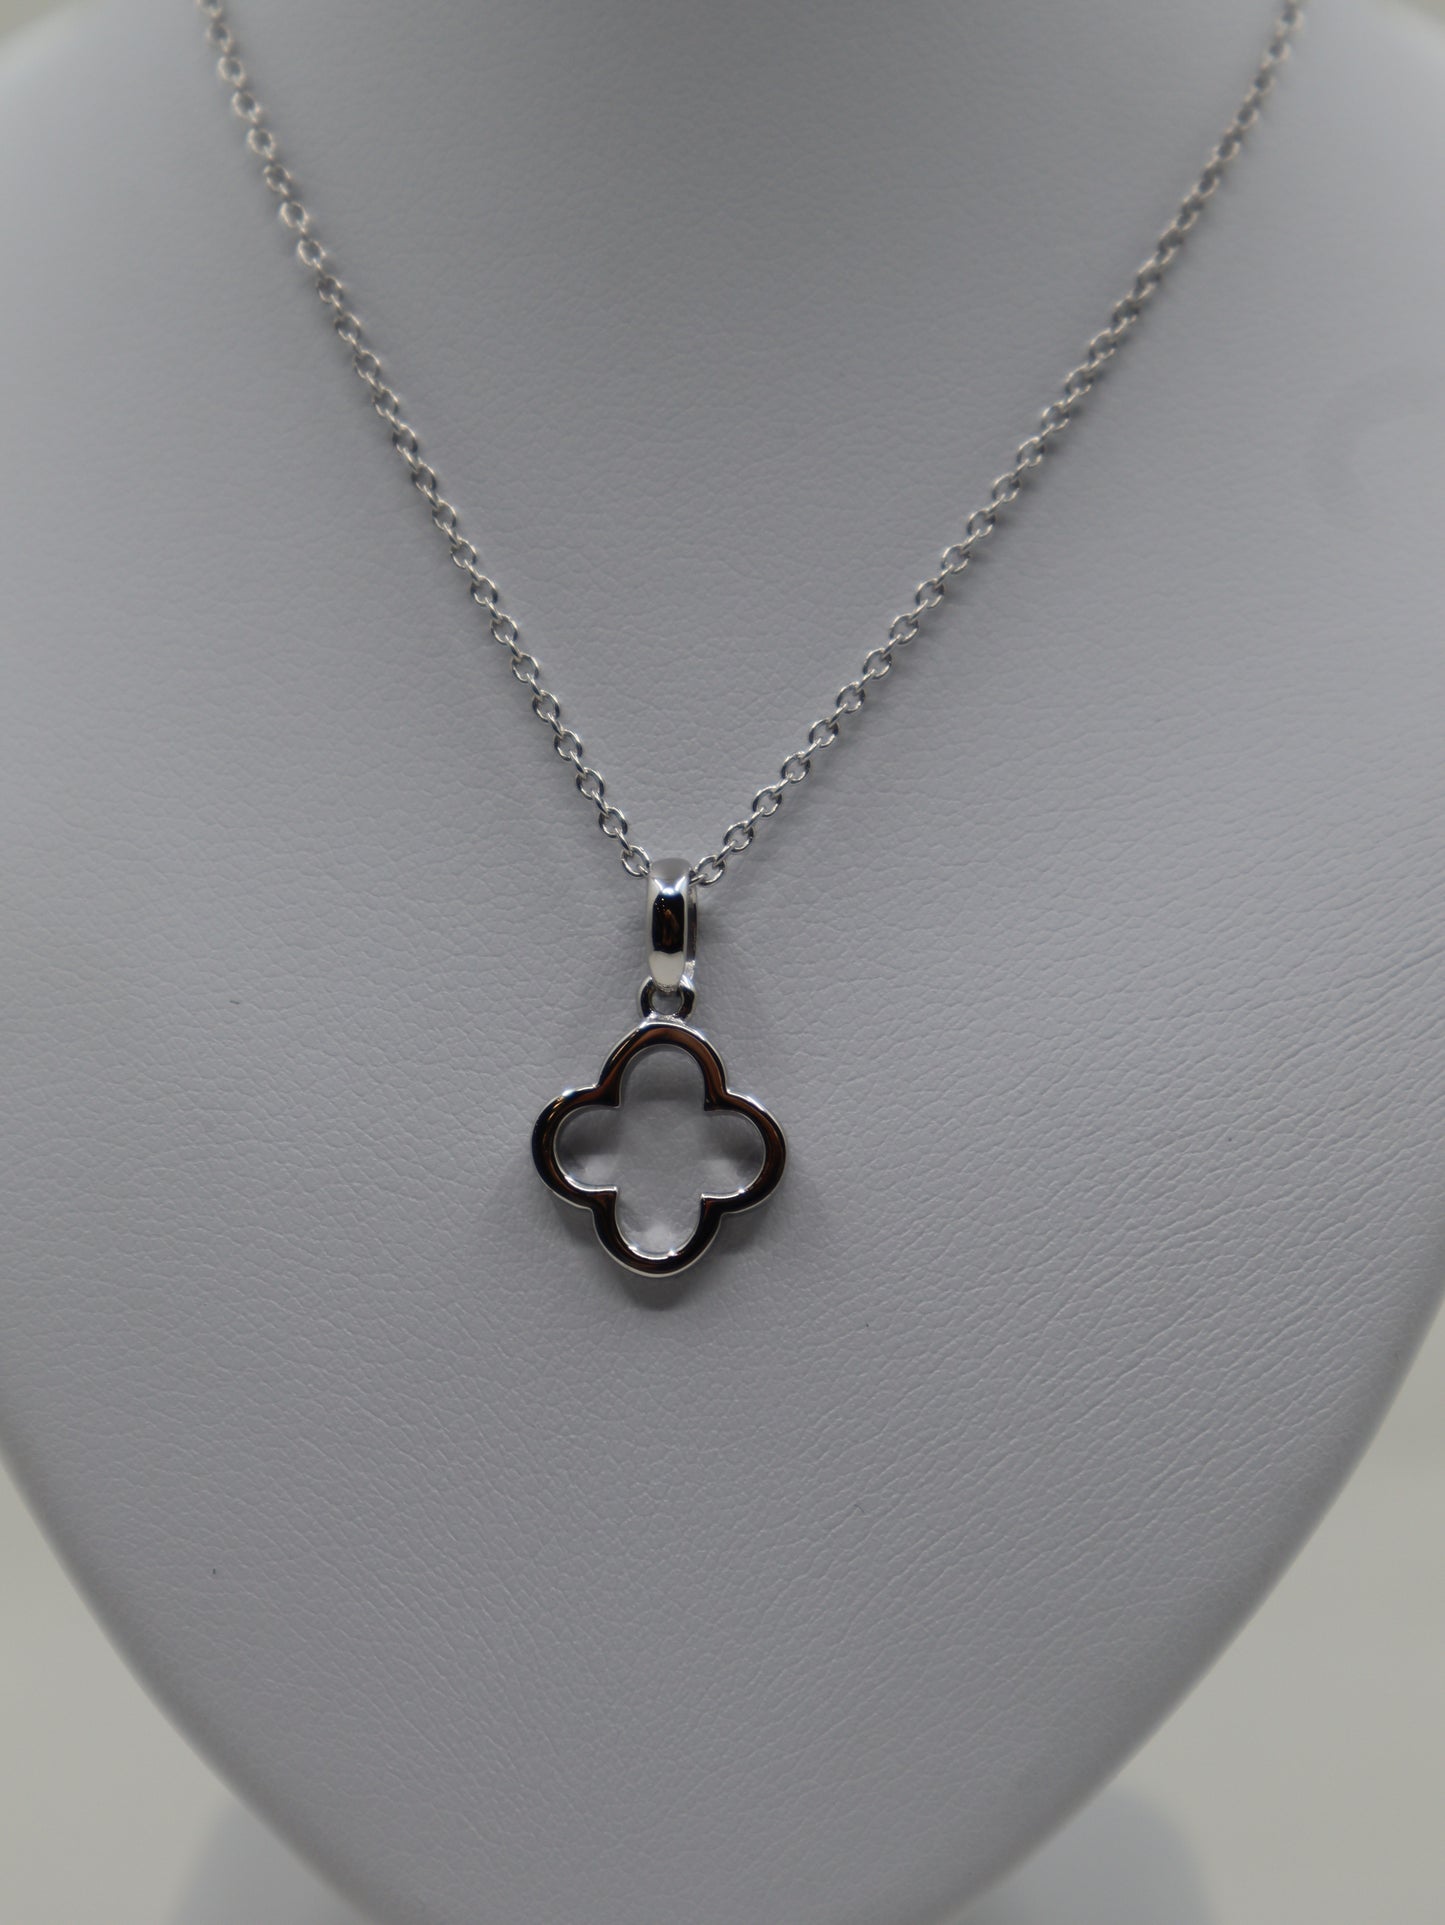 Silver Clover Pendant and Chain